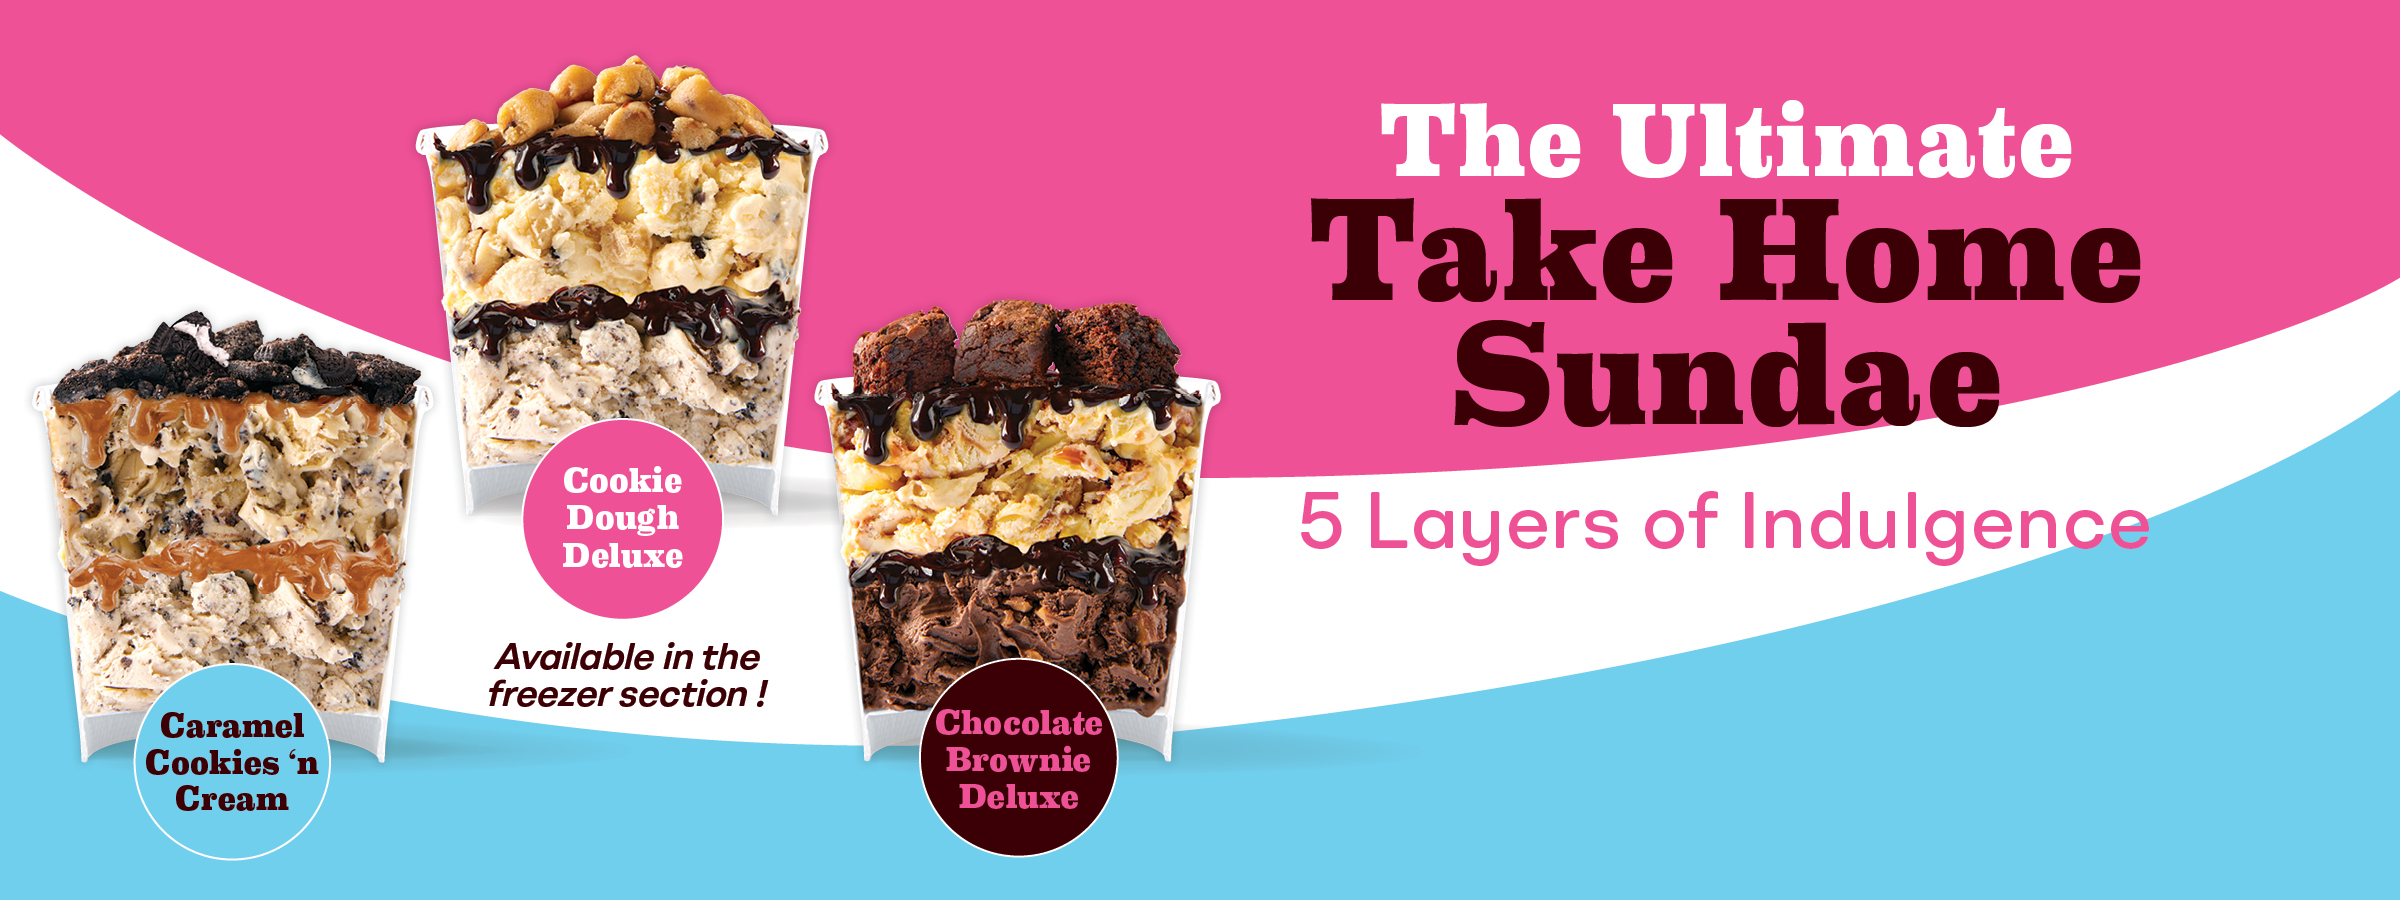 The Ultimate Take Home Sundae MARCH